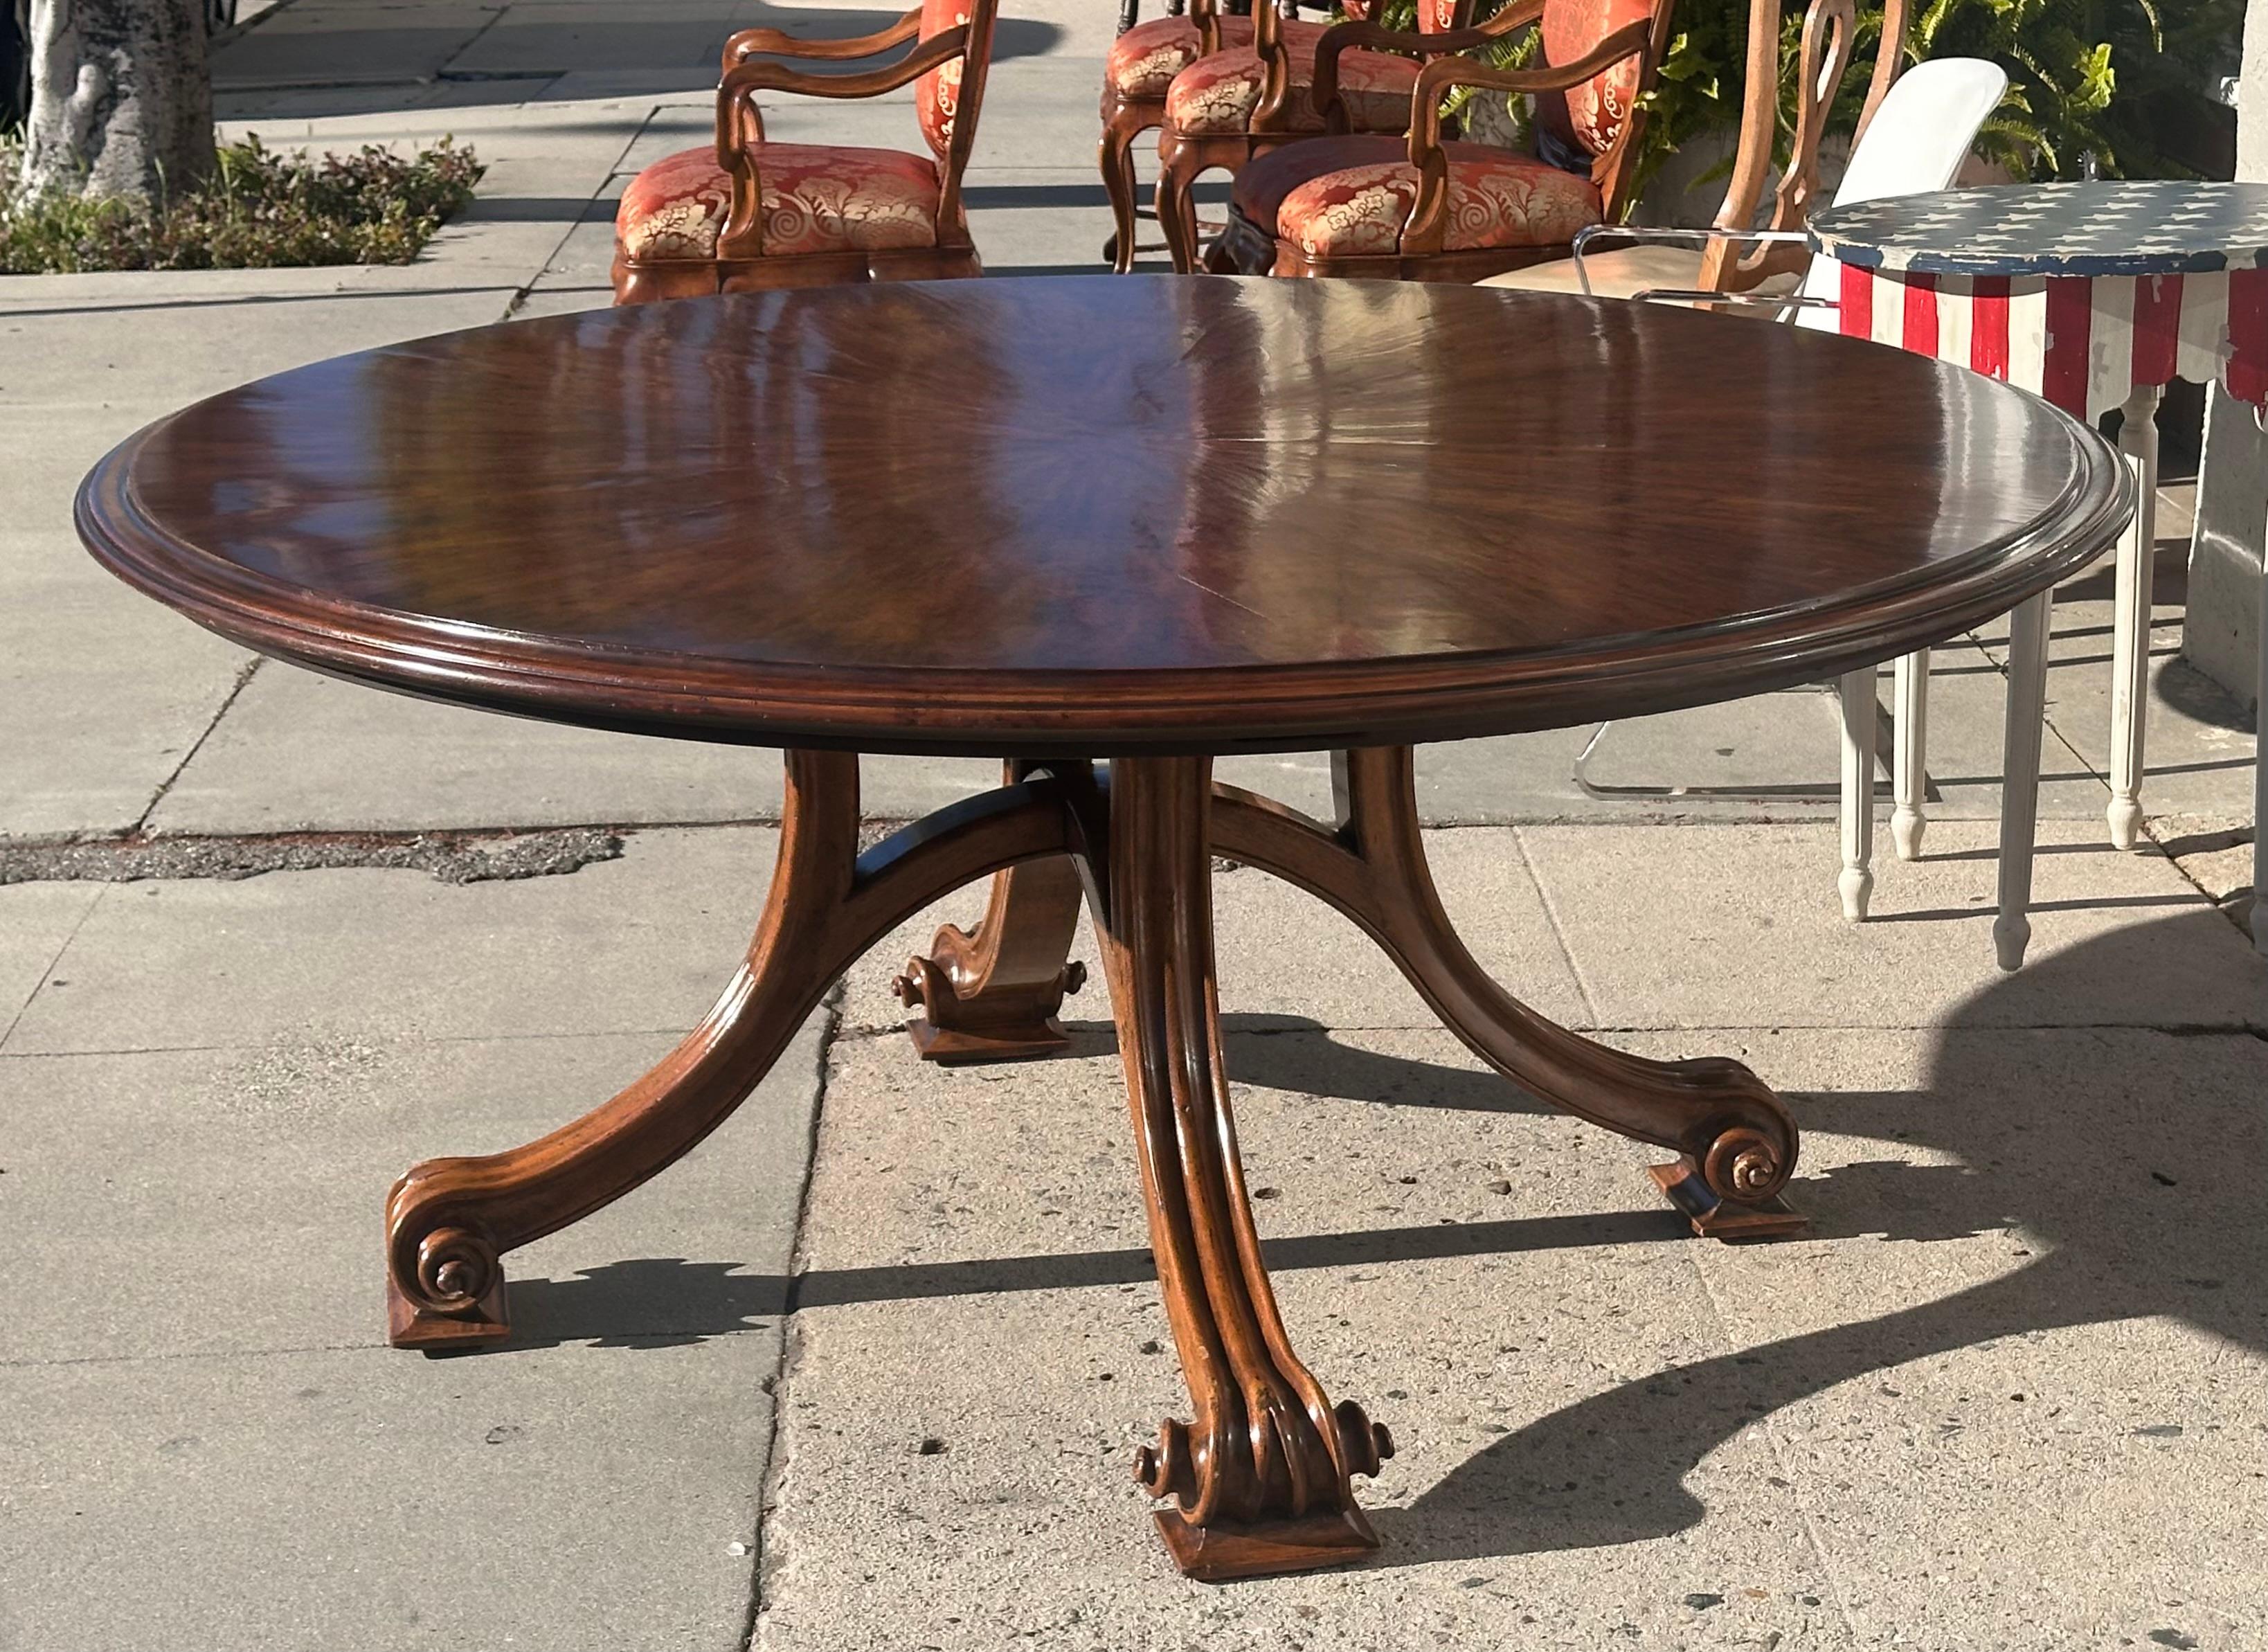 18th C Style Therien Volute Round Extension Dining Table. If features 5 unusual exterior leaves that extend the table from 66 inches diameter to 104 inches diameter round.